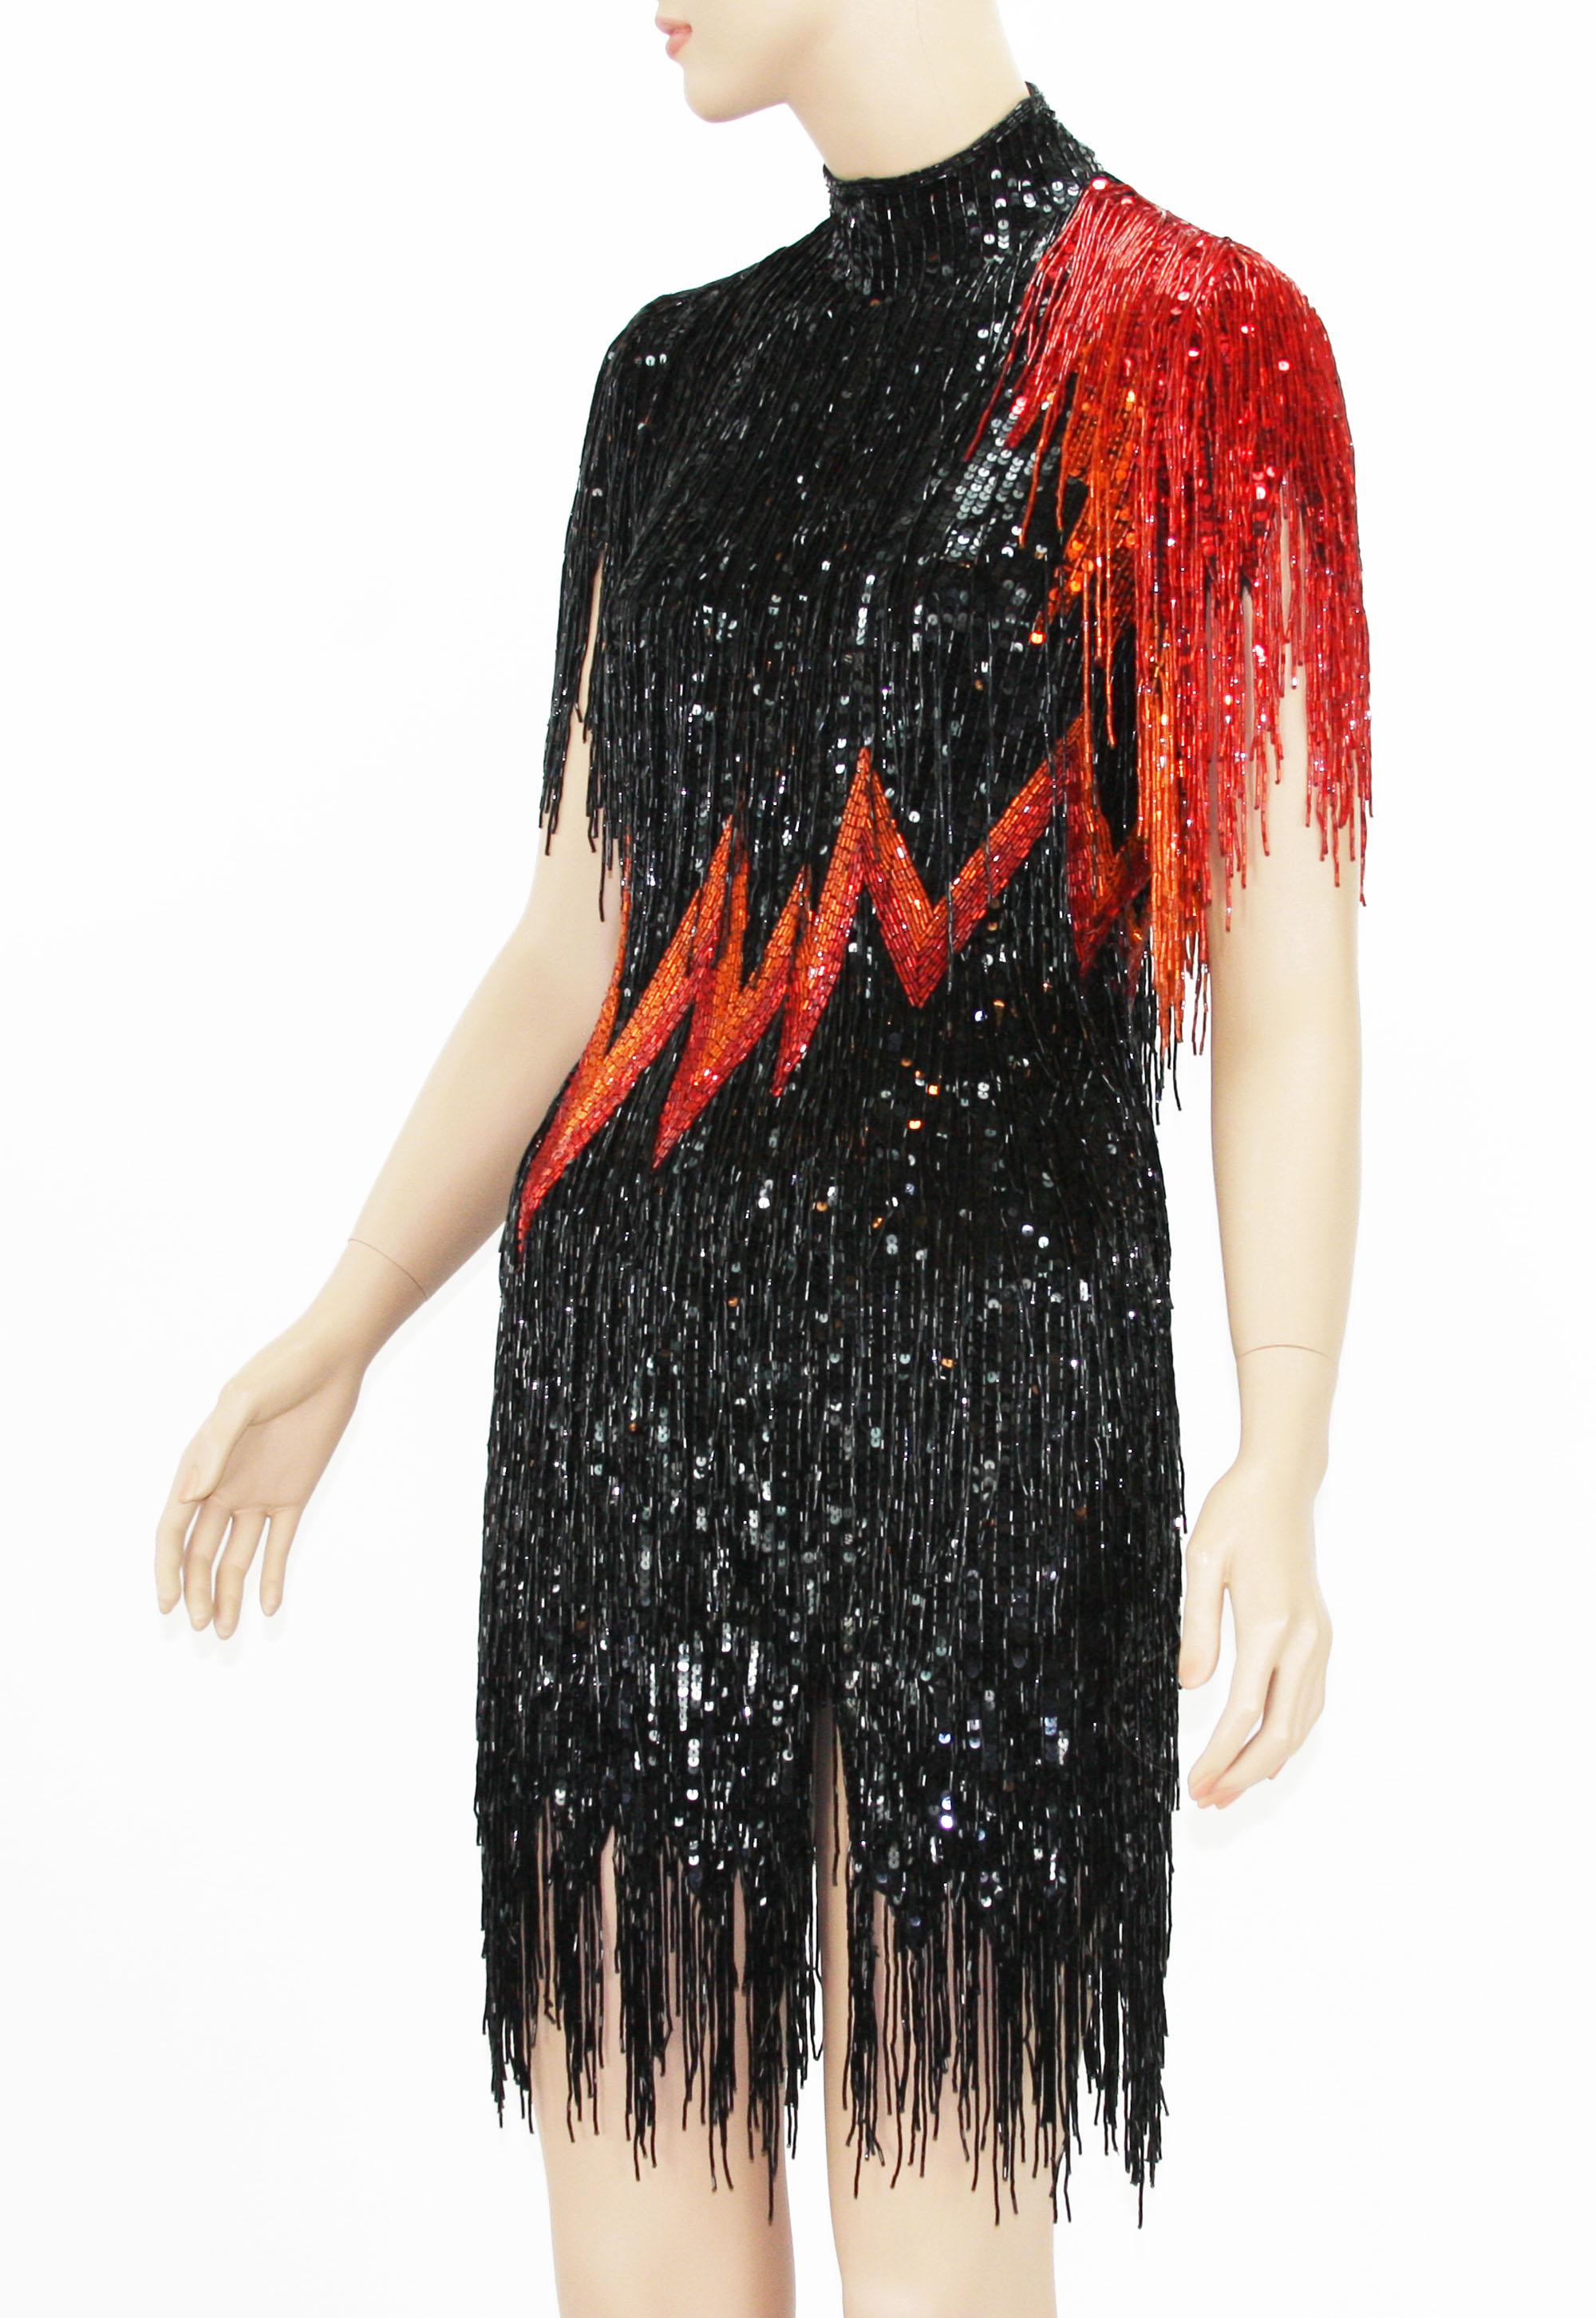 Bob Mackie *Flame* Fully Beaded Fringe Dress
1982 year Collection 
Fully Beaded in Black, Red and Orange.
Size label missing.
Measurements: Length - 34 inches + 4 fringe, Bust - 34/36